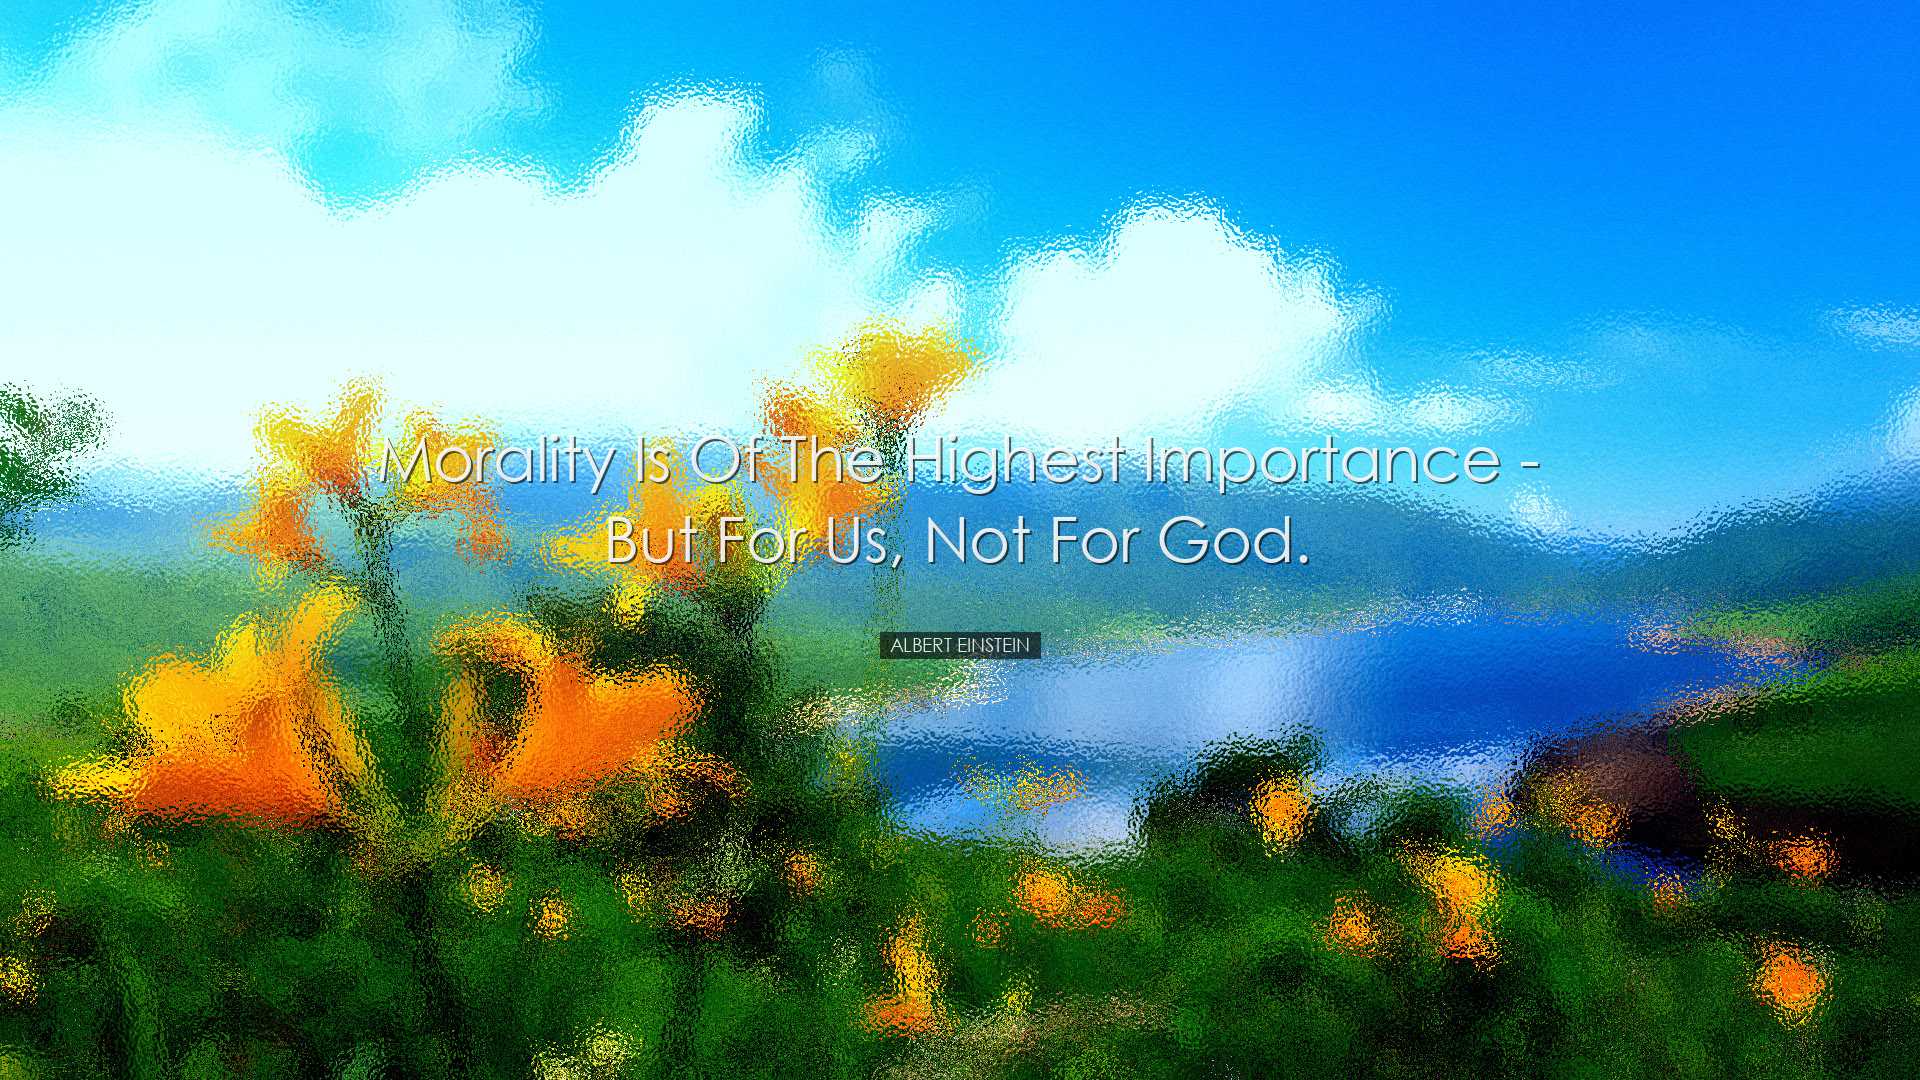 Morality is of the highest importance - but for us, not for God. -